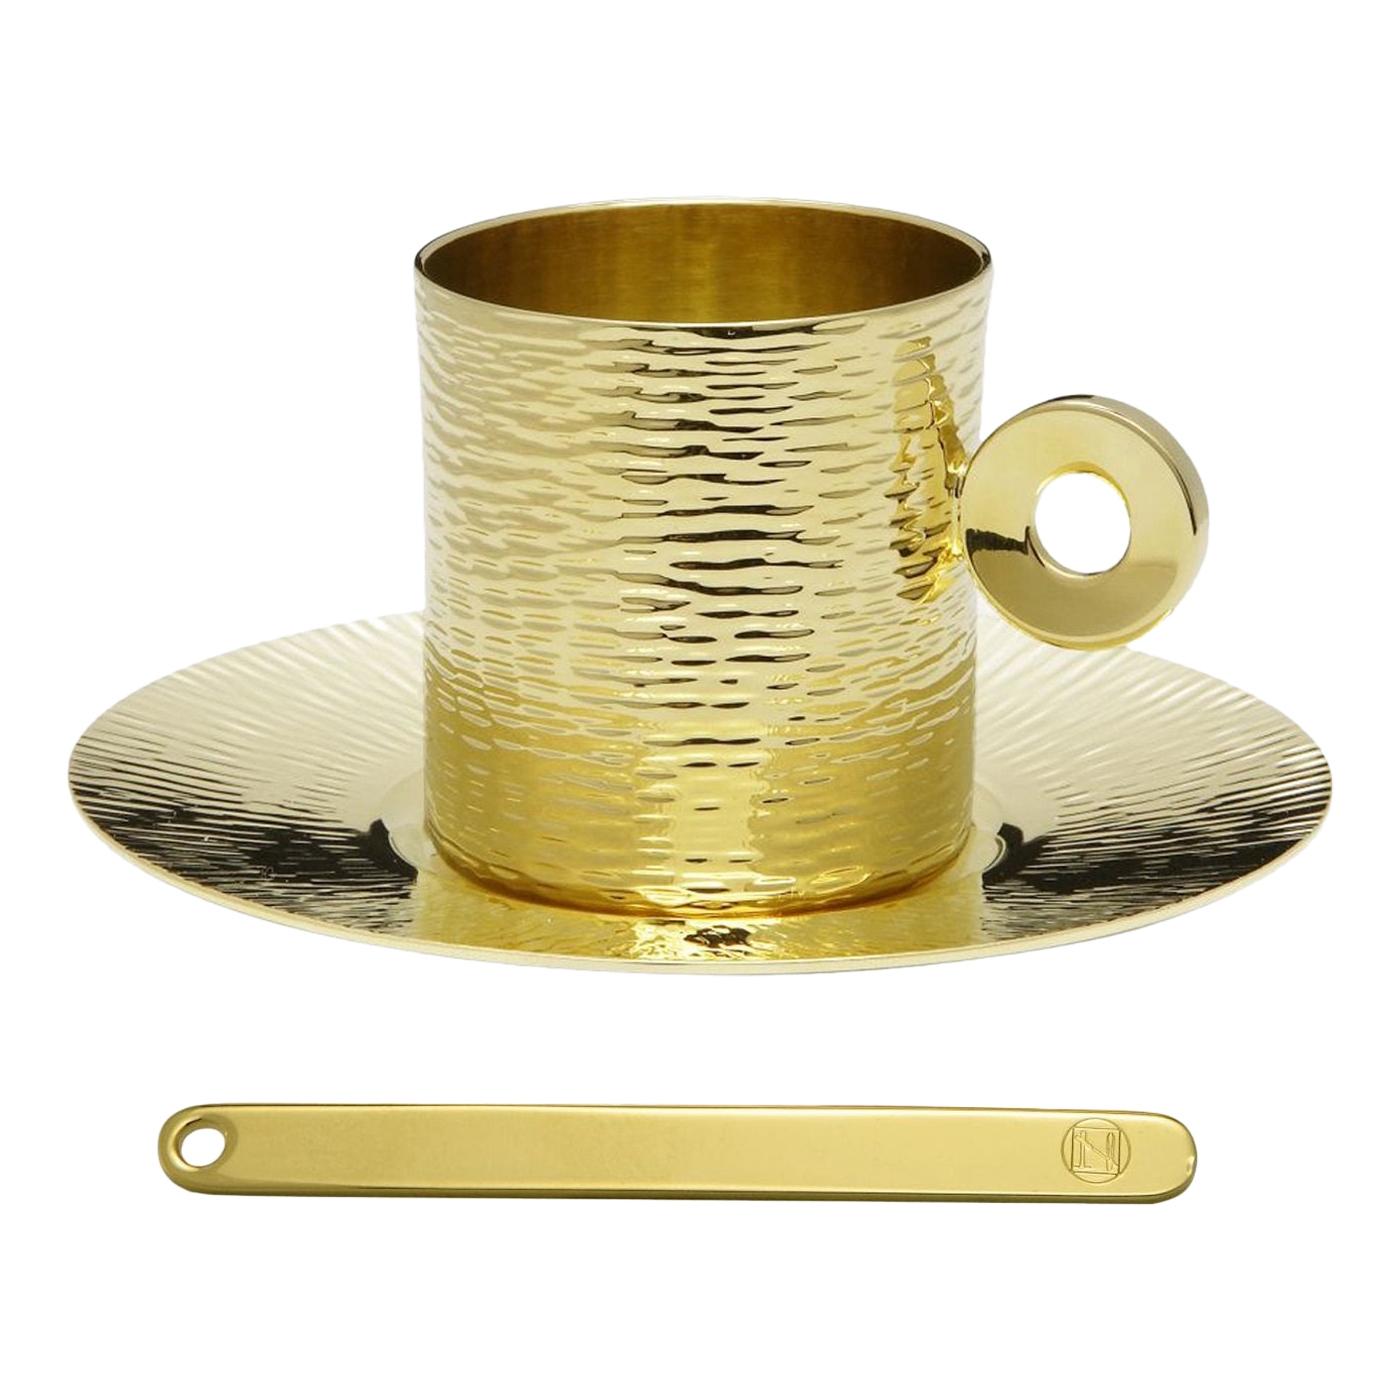 Bus Demitasse Gold plated Cup with Saucer and Stirring Stick 